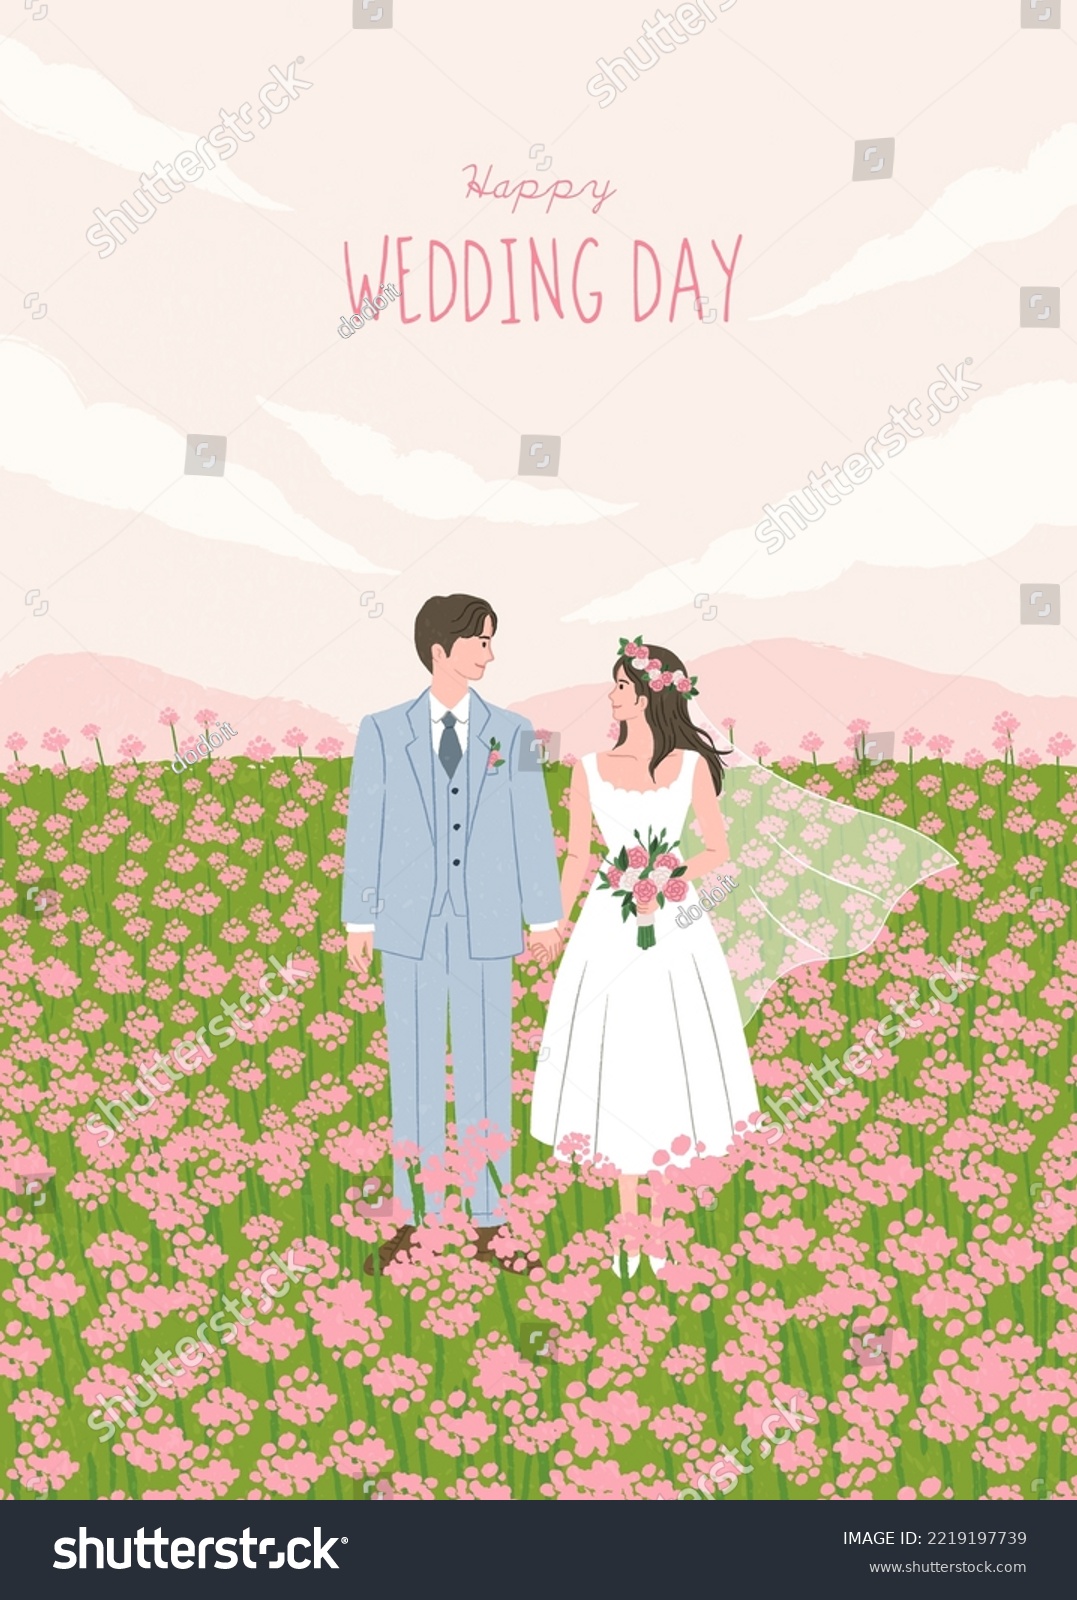 SVG of floral wedding invitation with bride and groom portrait illustration. landscape of Spring field and wild flowers. For poster, gift, print, card, banner, cover background. Hand drawn style. Flat vector svg